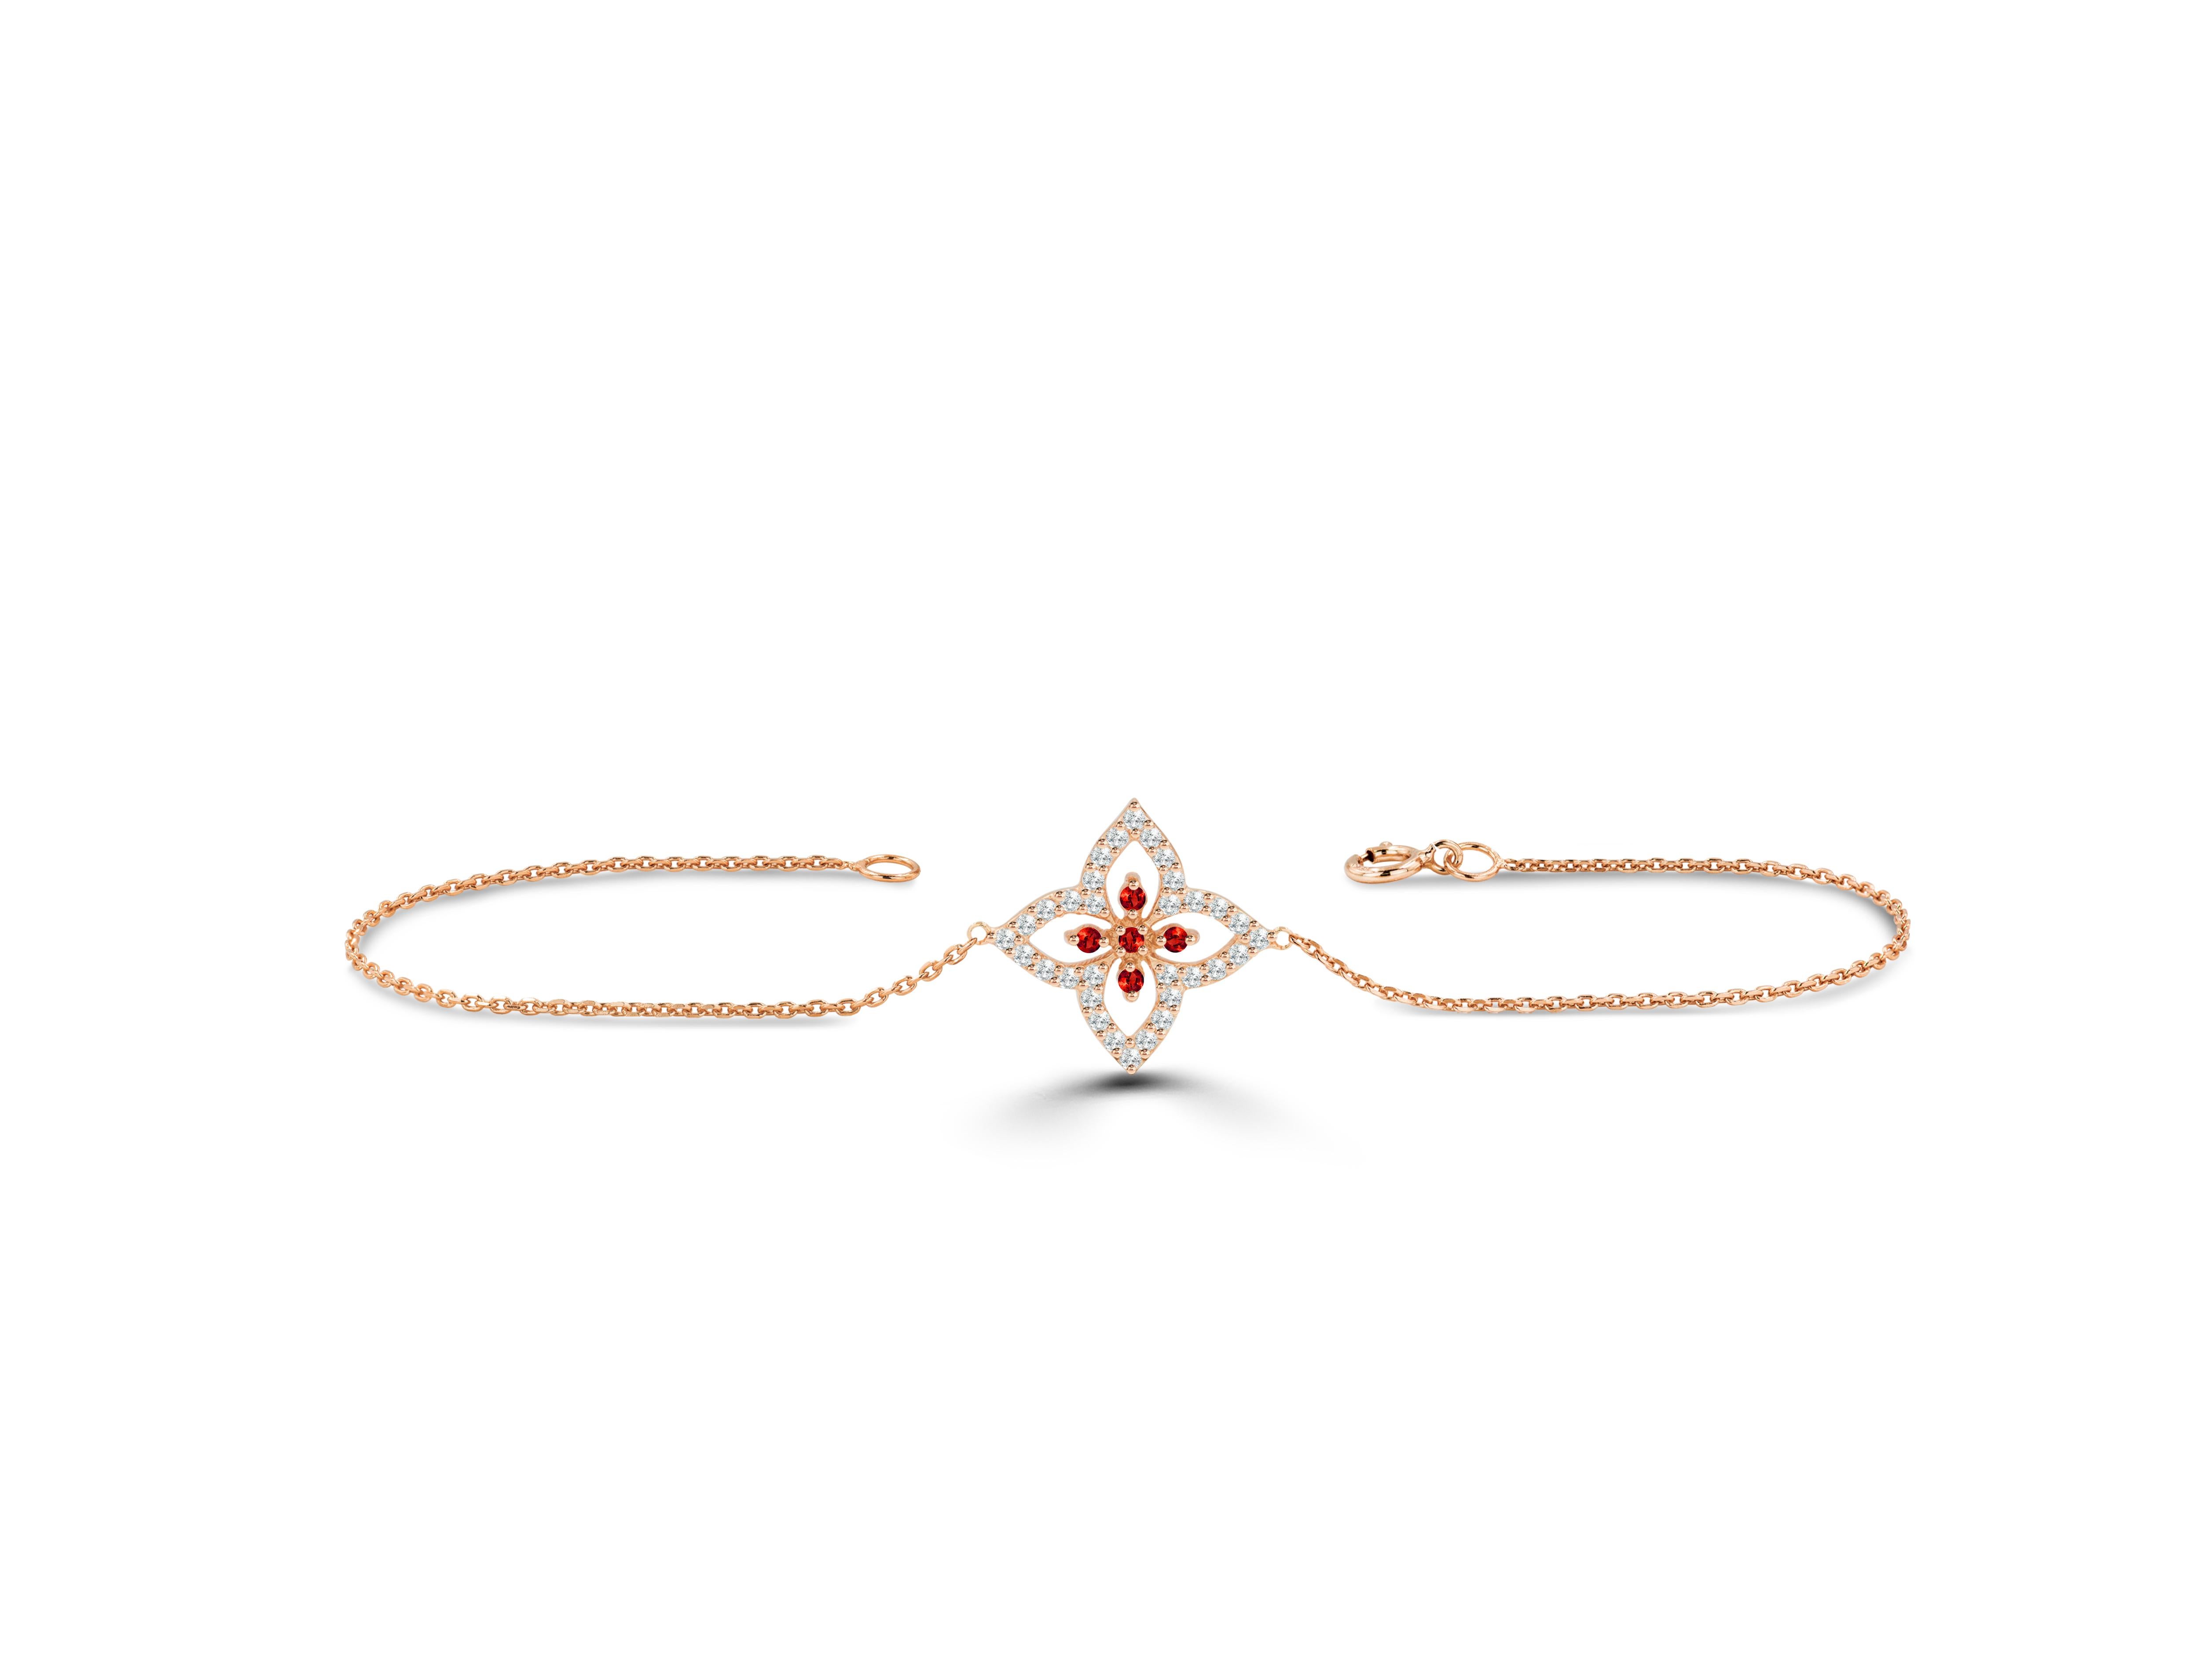 0.25 Carat diamond clover bracelet is the perfect everyday bracelet to wear. You can get customized in the gold color and gold Karat of your choice, it can also be customized in the precious stone of your choice - Emerald, Ruby, or Sapphire. Our